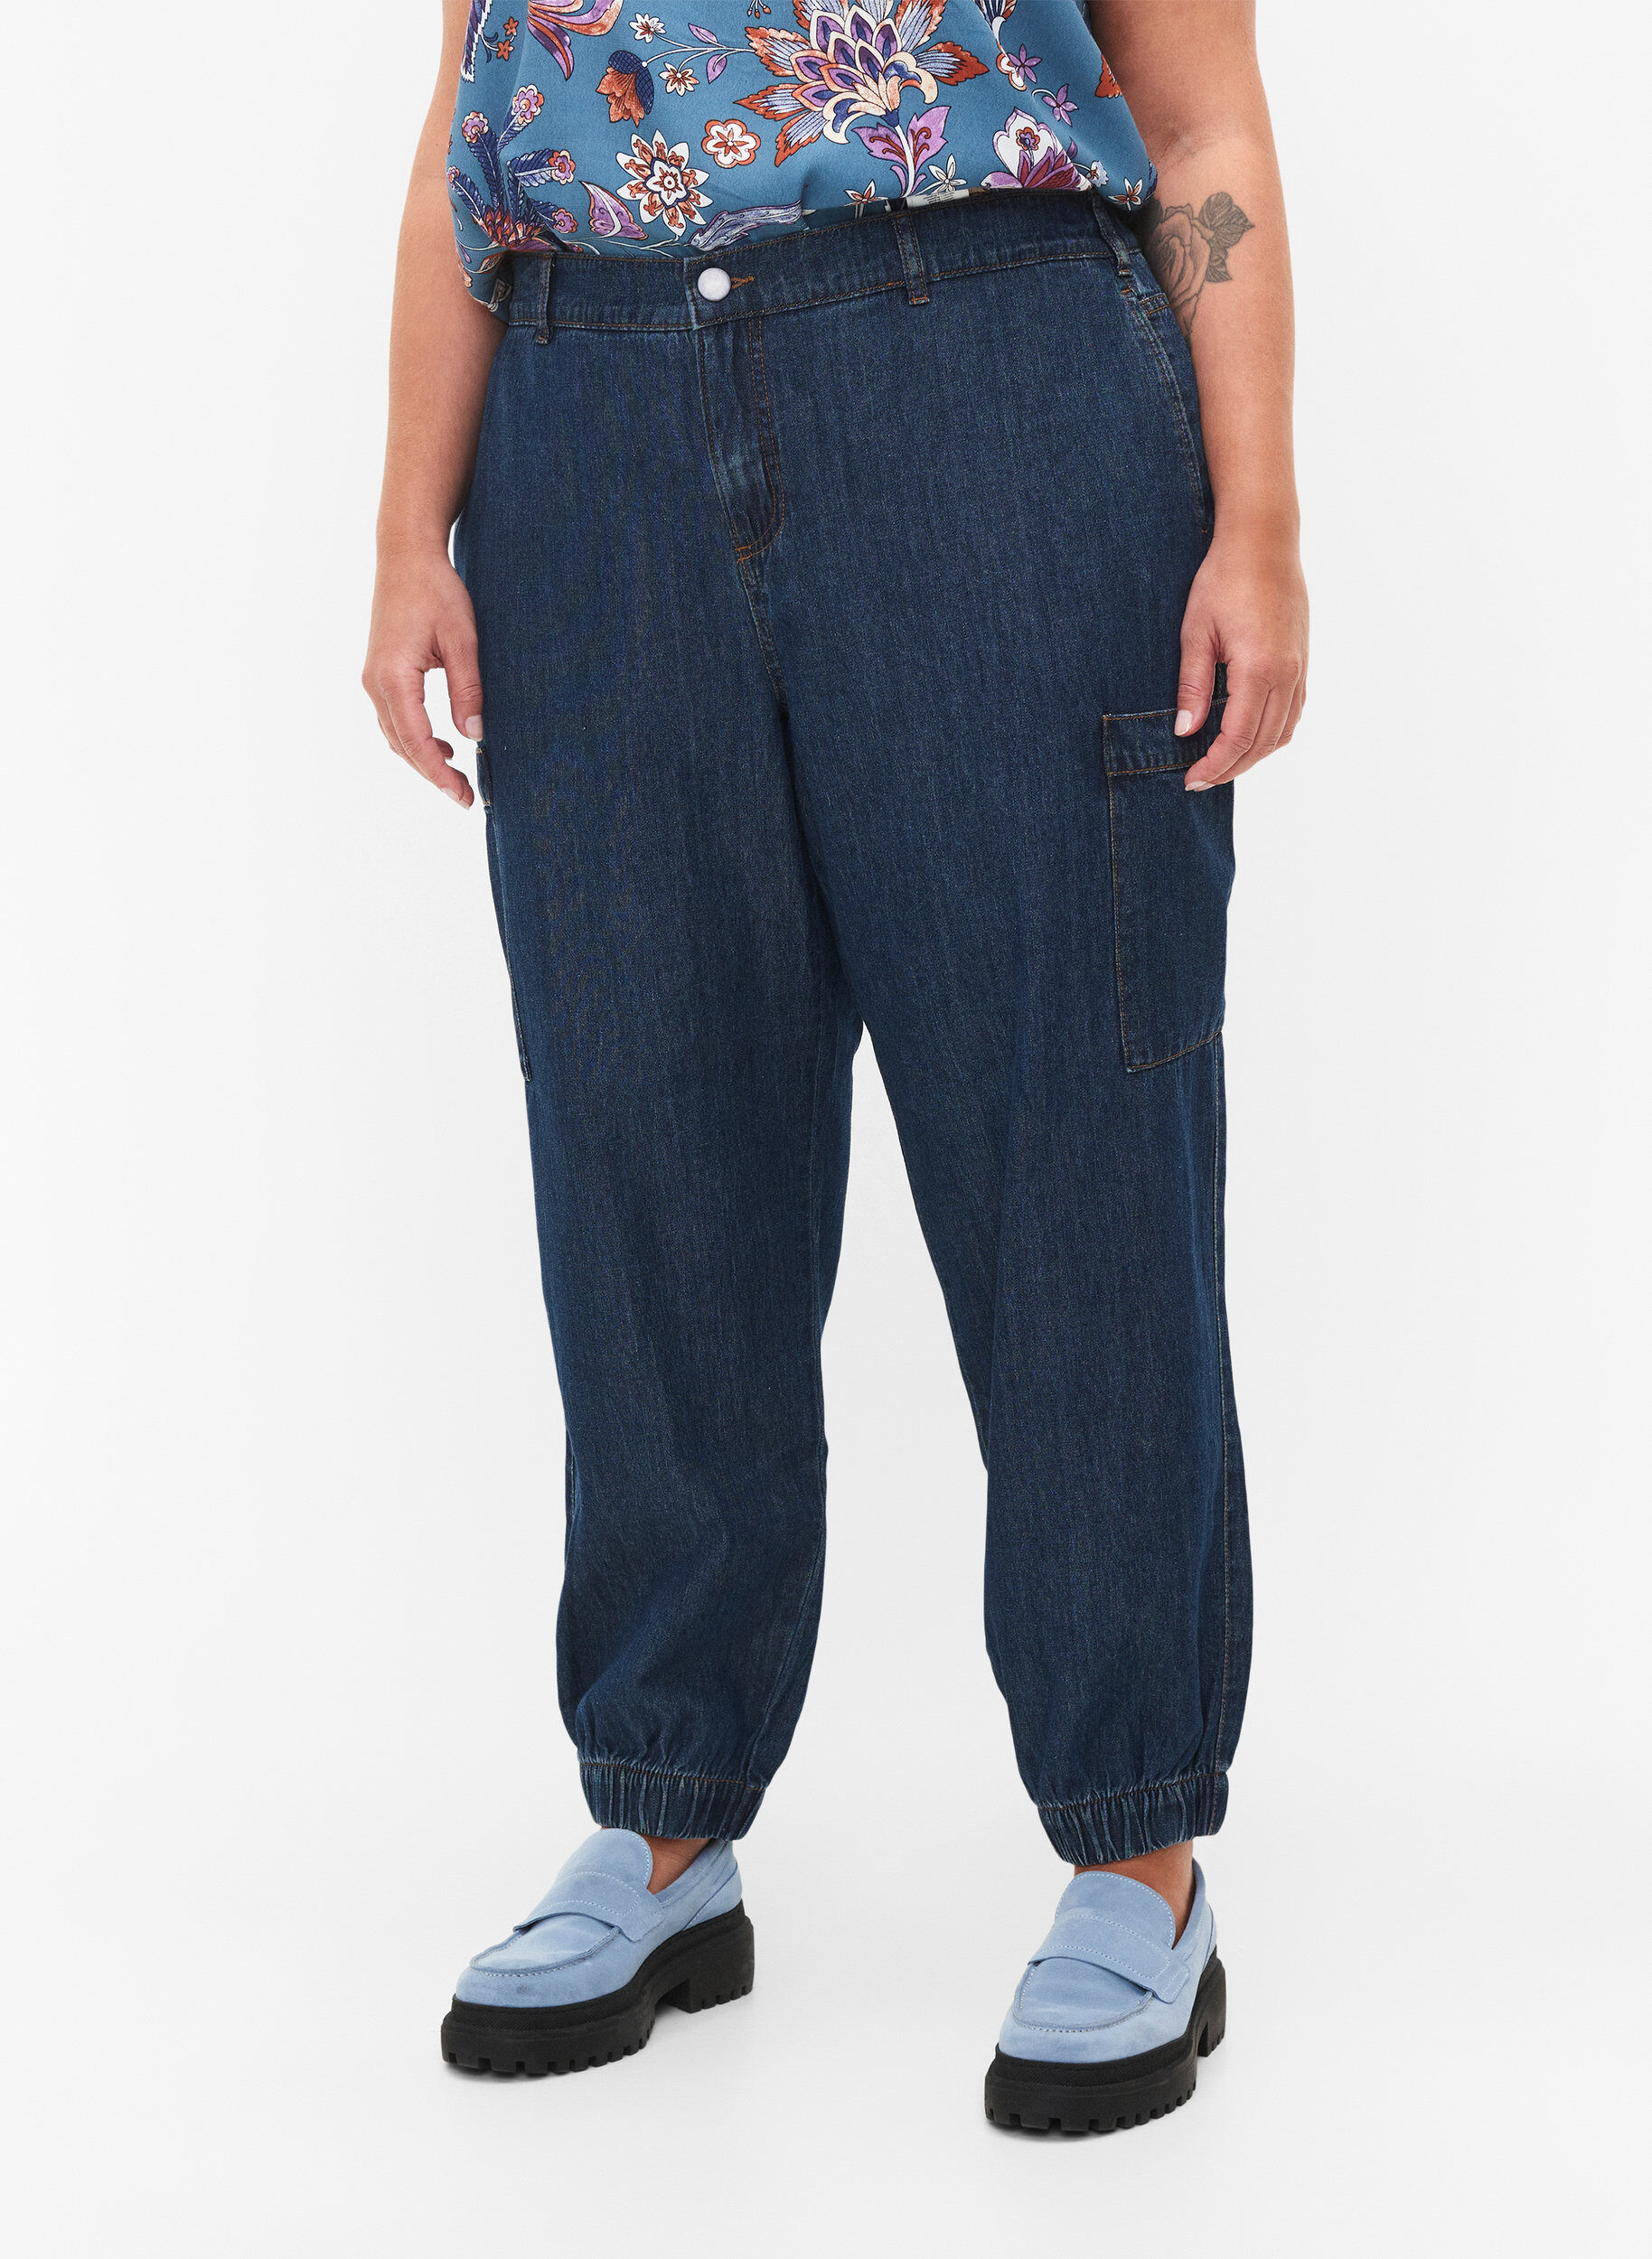 Cargo jeans with pockets